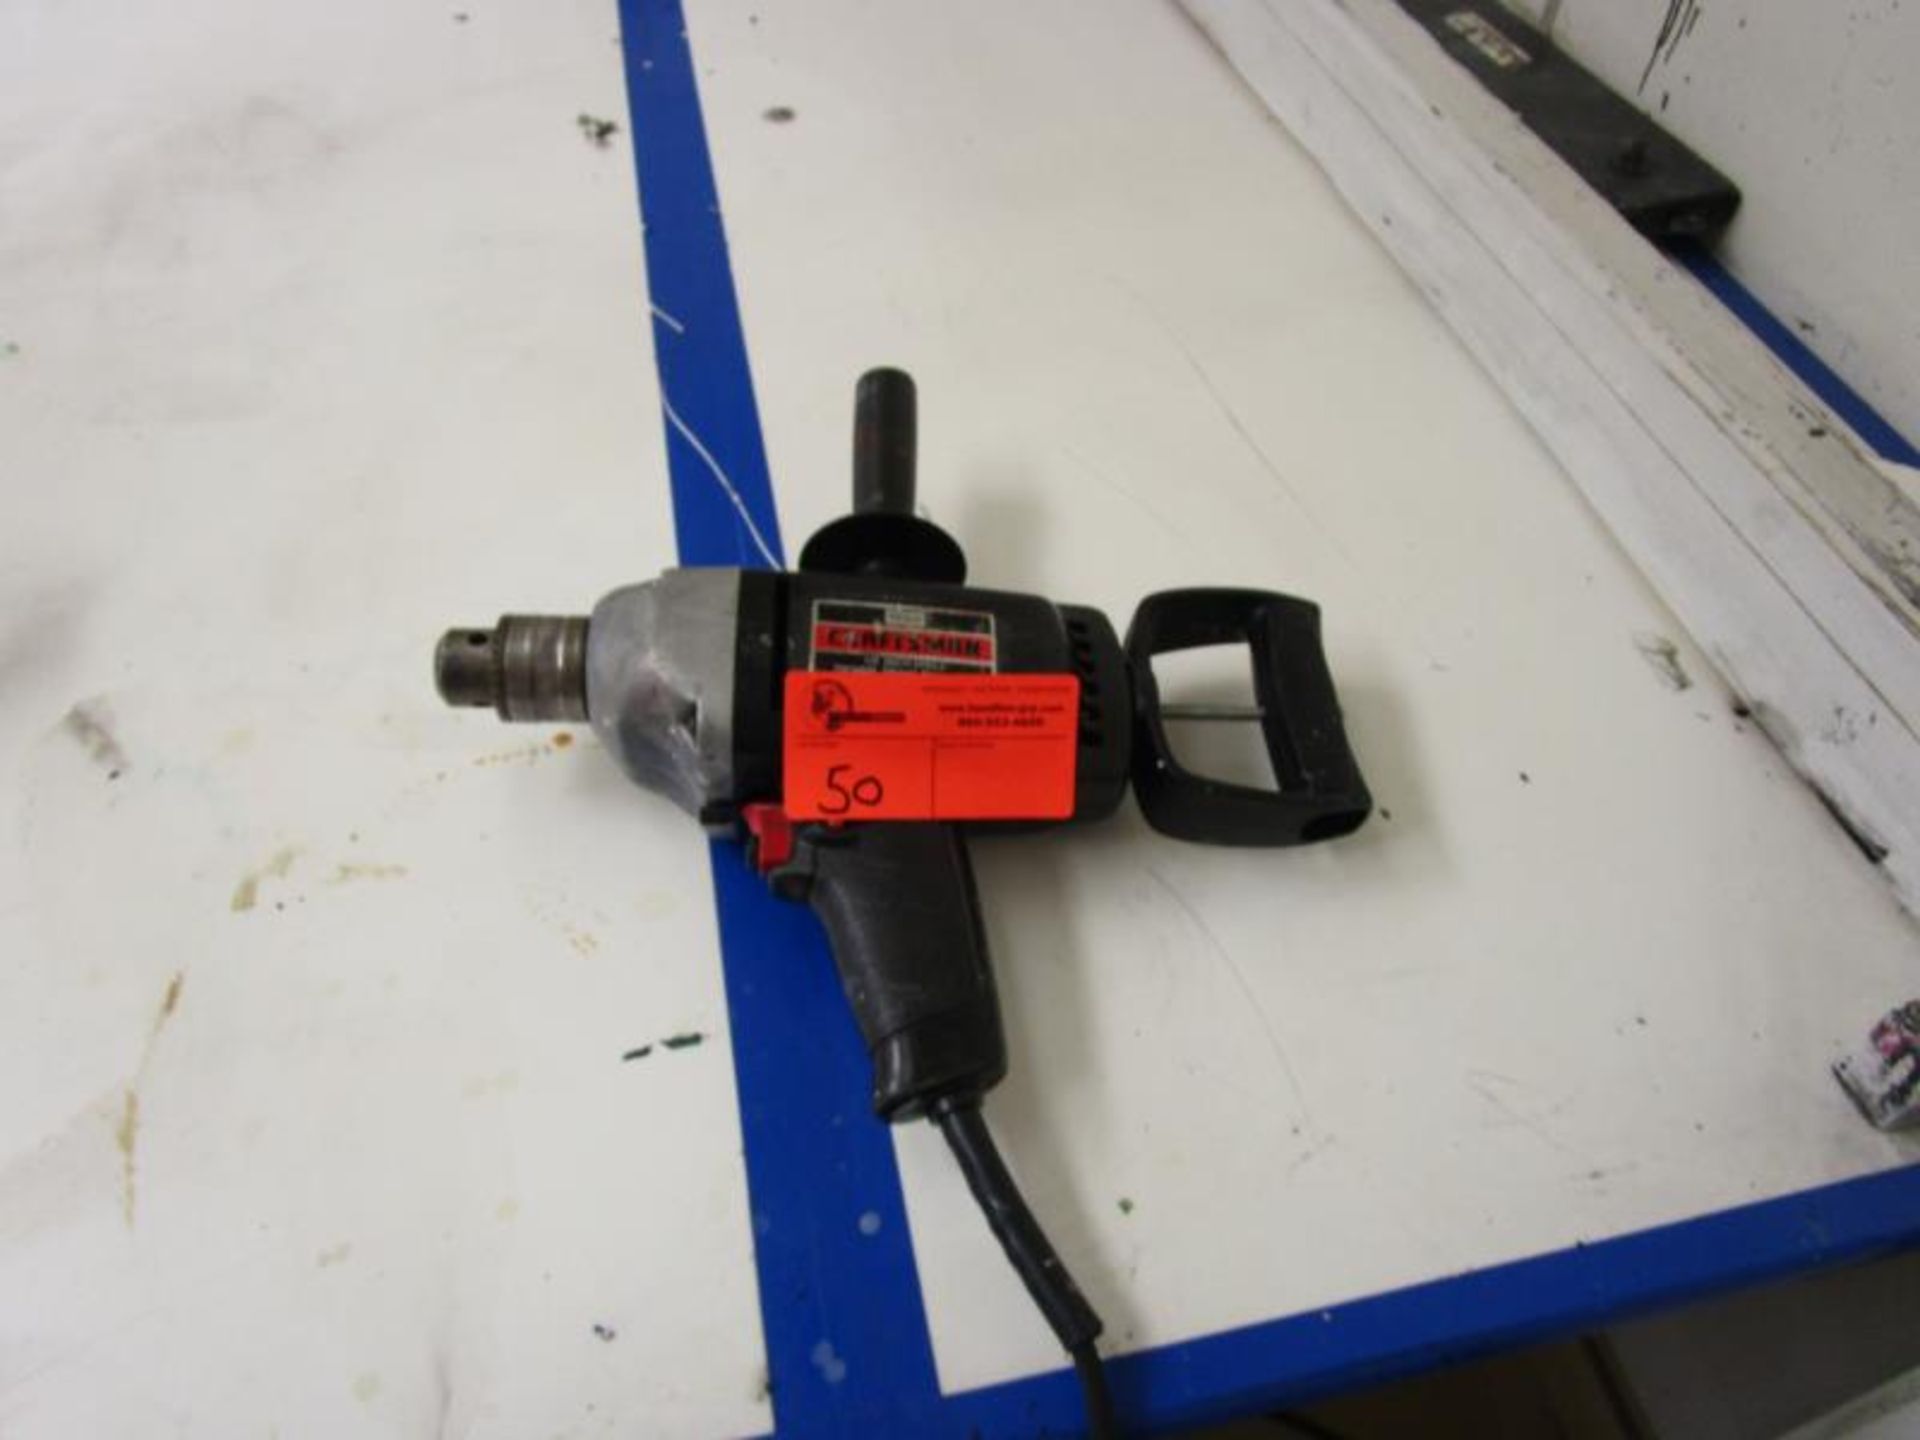 Craftsman 1/2" Variable Speed Reversible Drill - Image 2 of 2